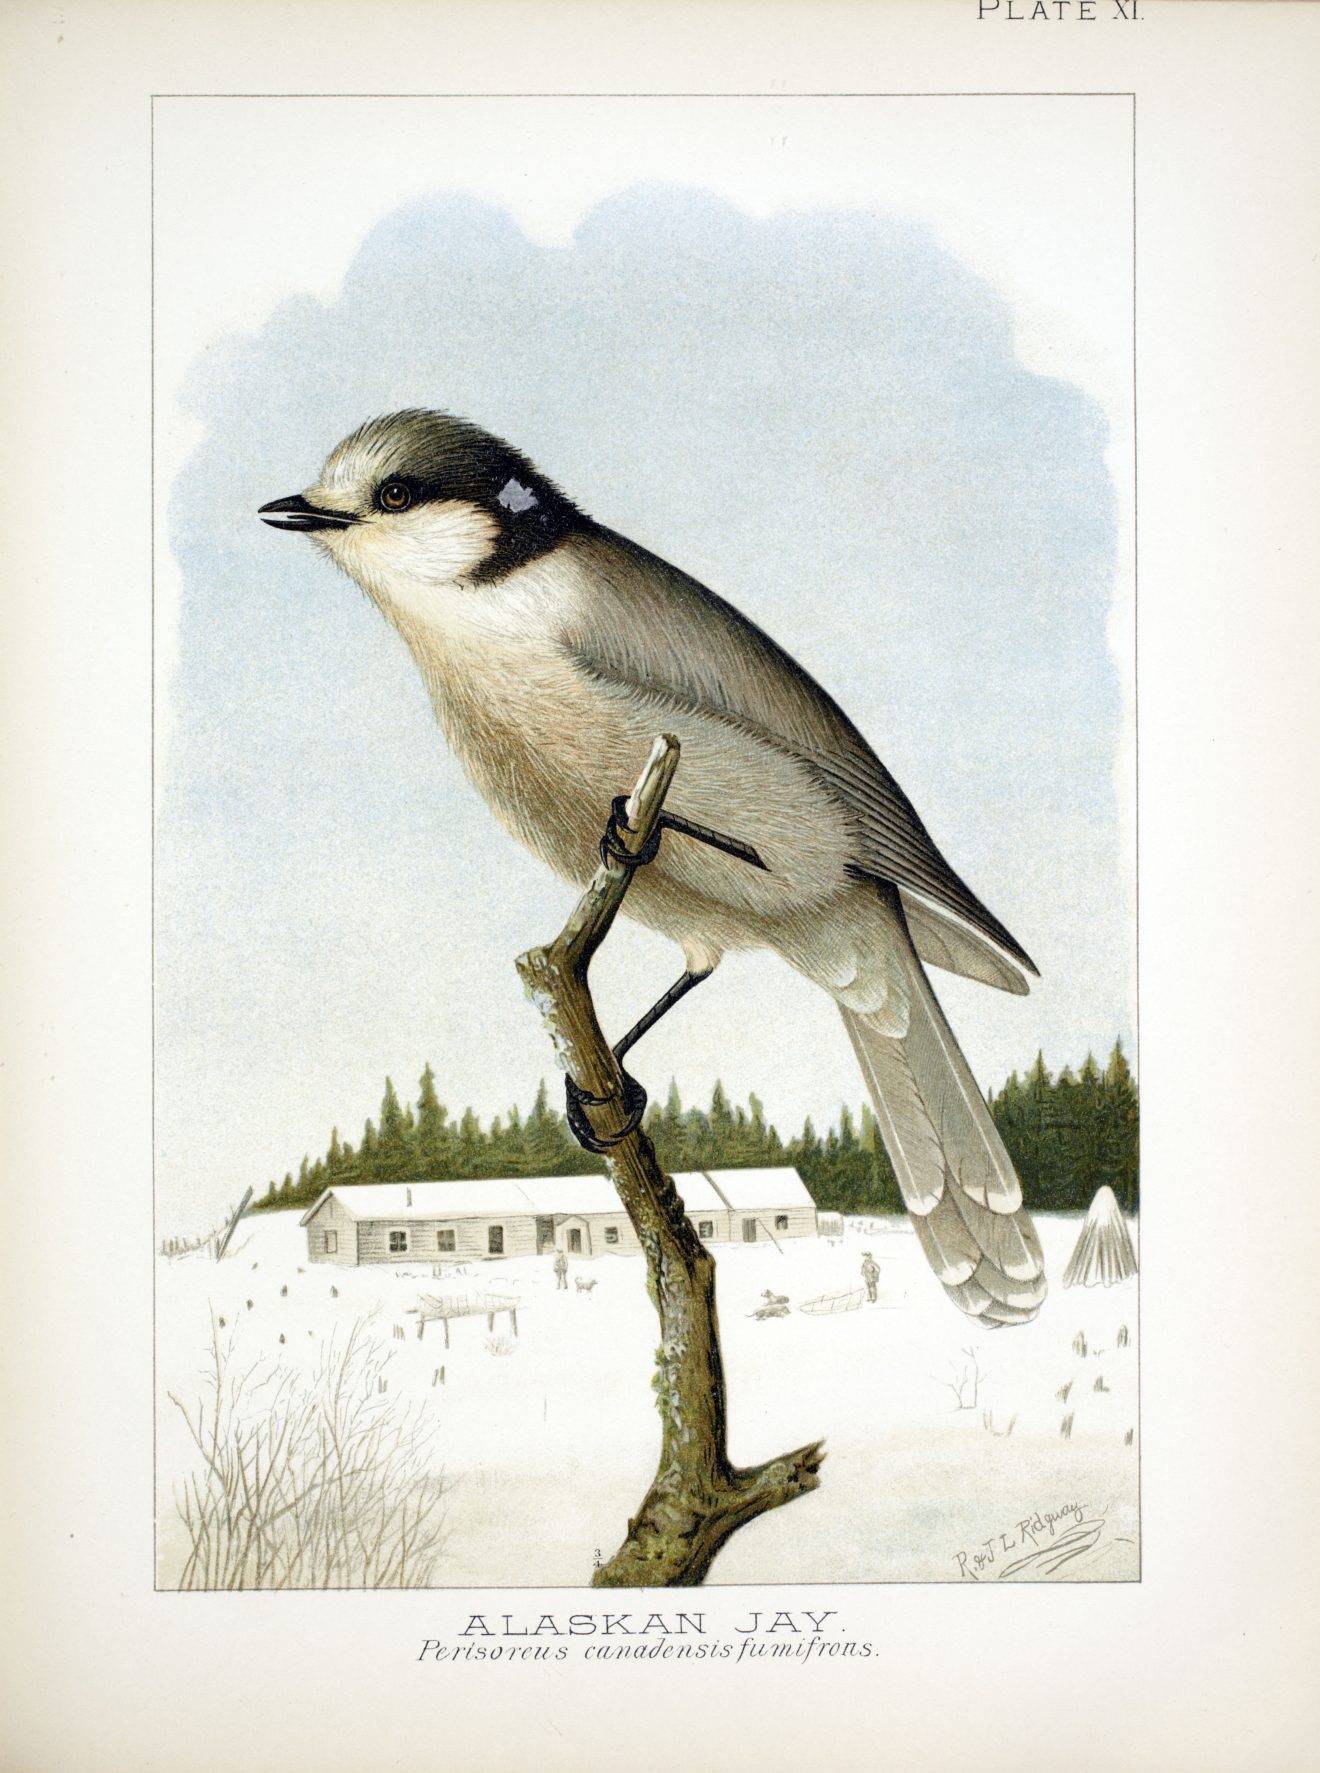 Drawing of small bird on a twig in a snowy setting.